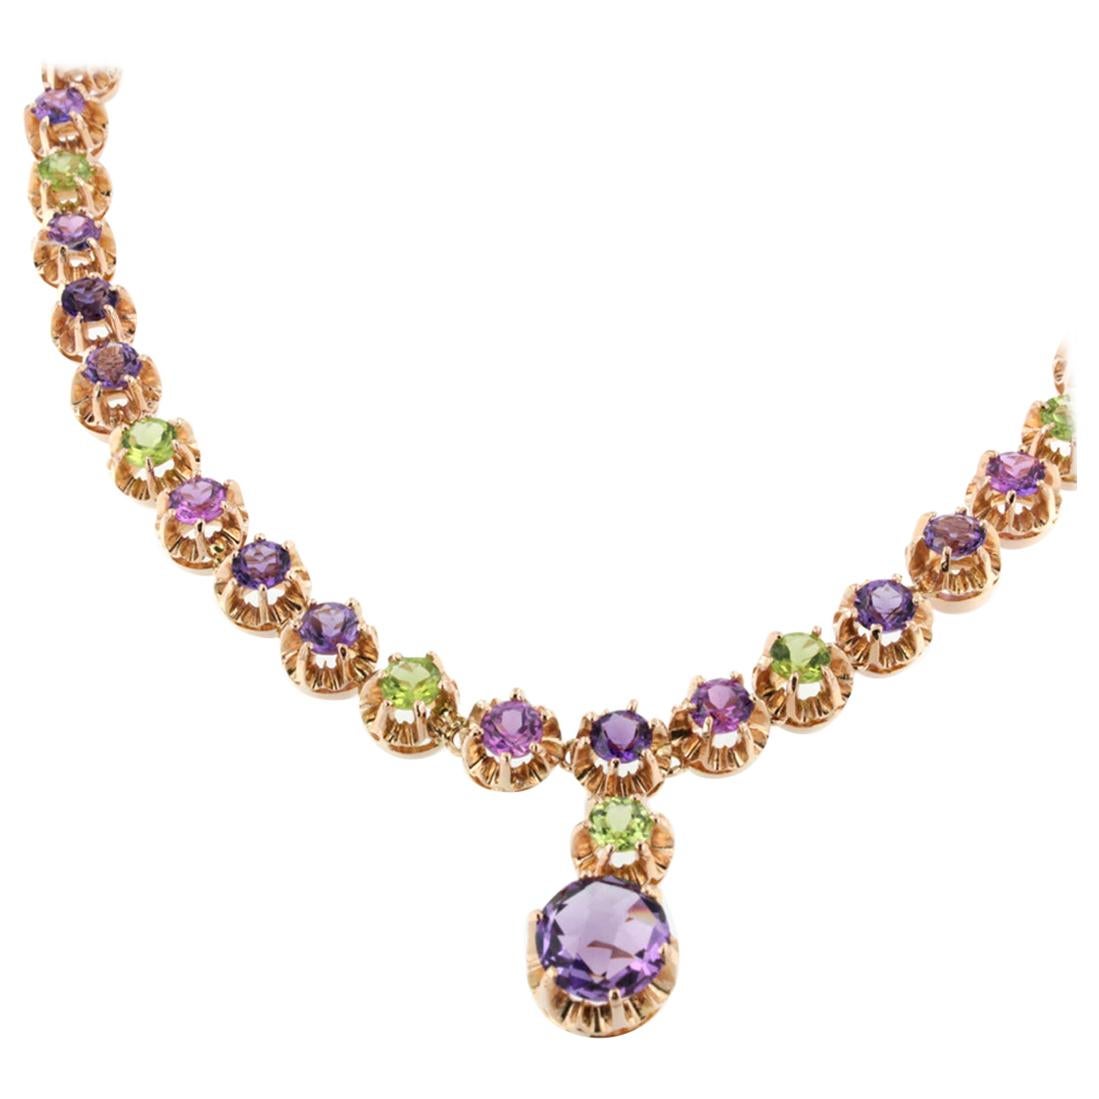 18 Karat Rose Gold with Amethyst and Peridot Necklace